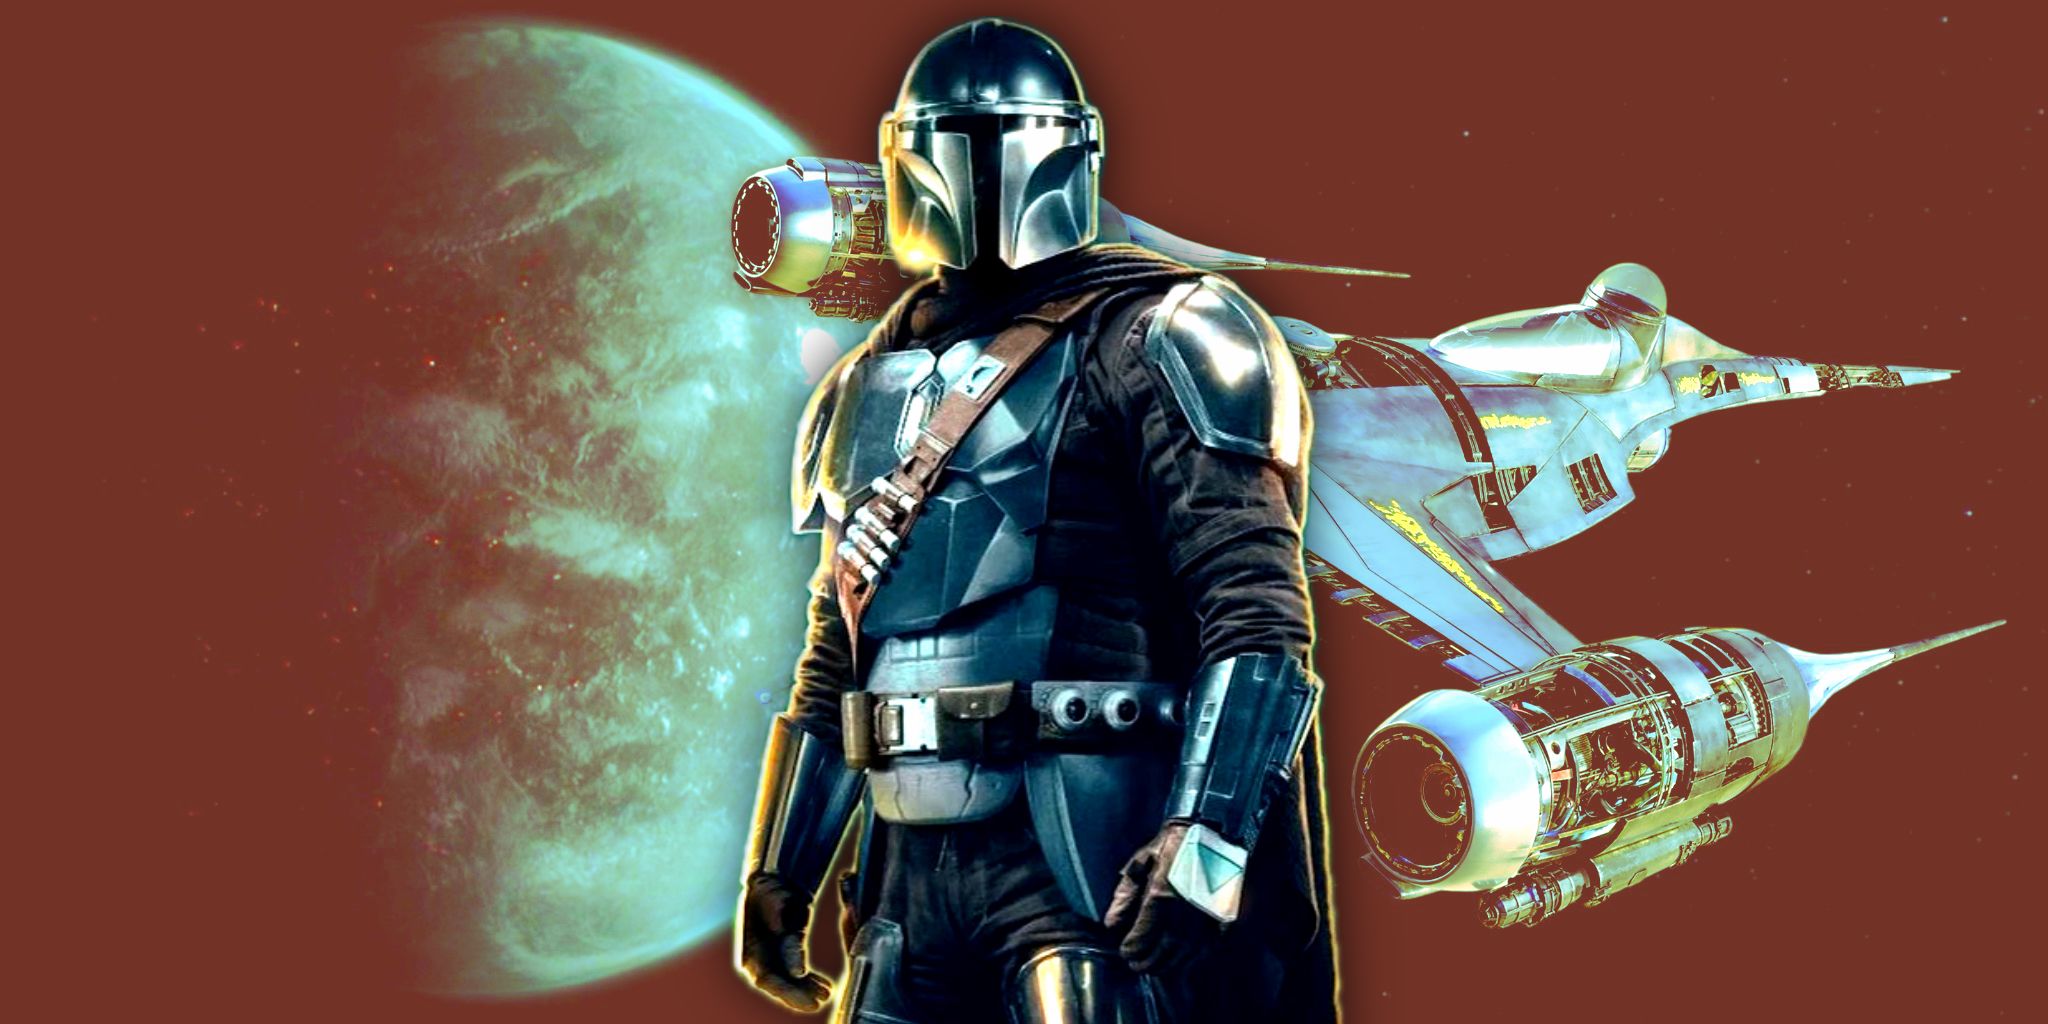 Din Djarin poses in The Mandalorian poster with the planet Nevarro and his N-1 Starfighter in the background